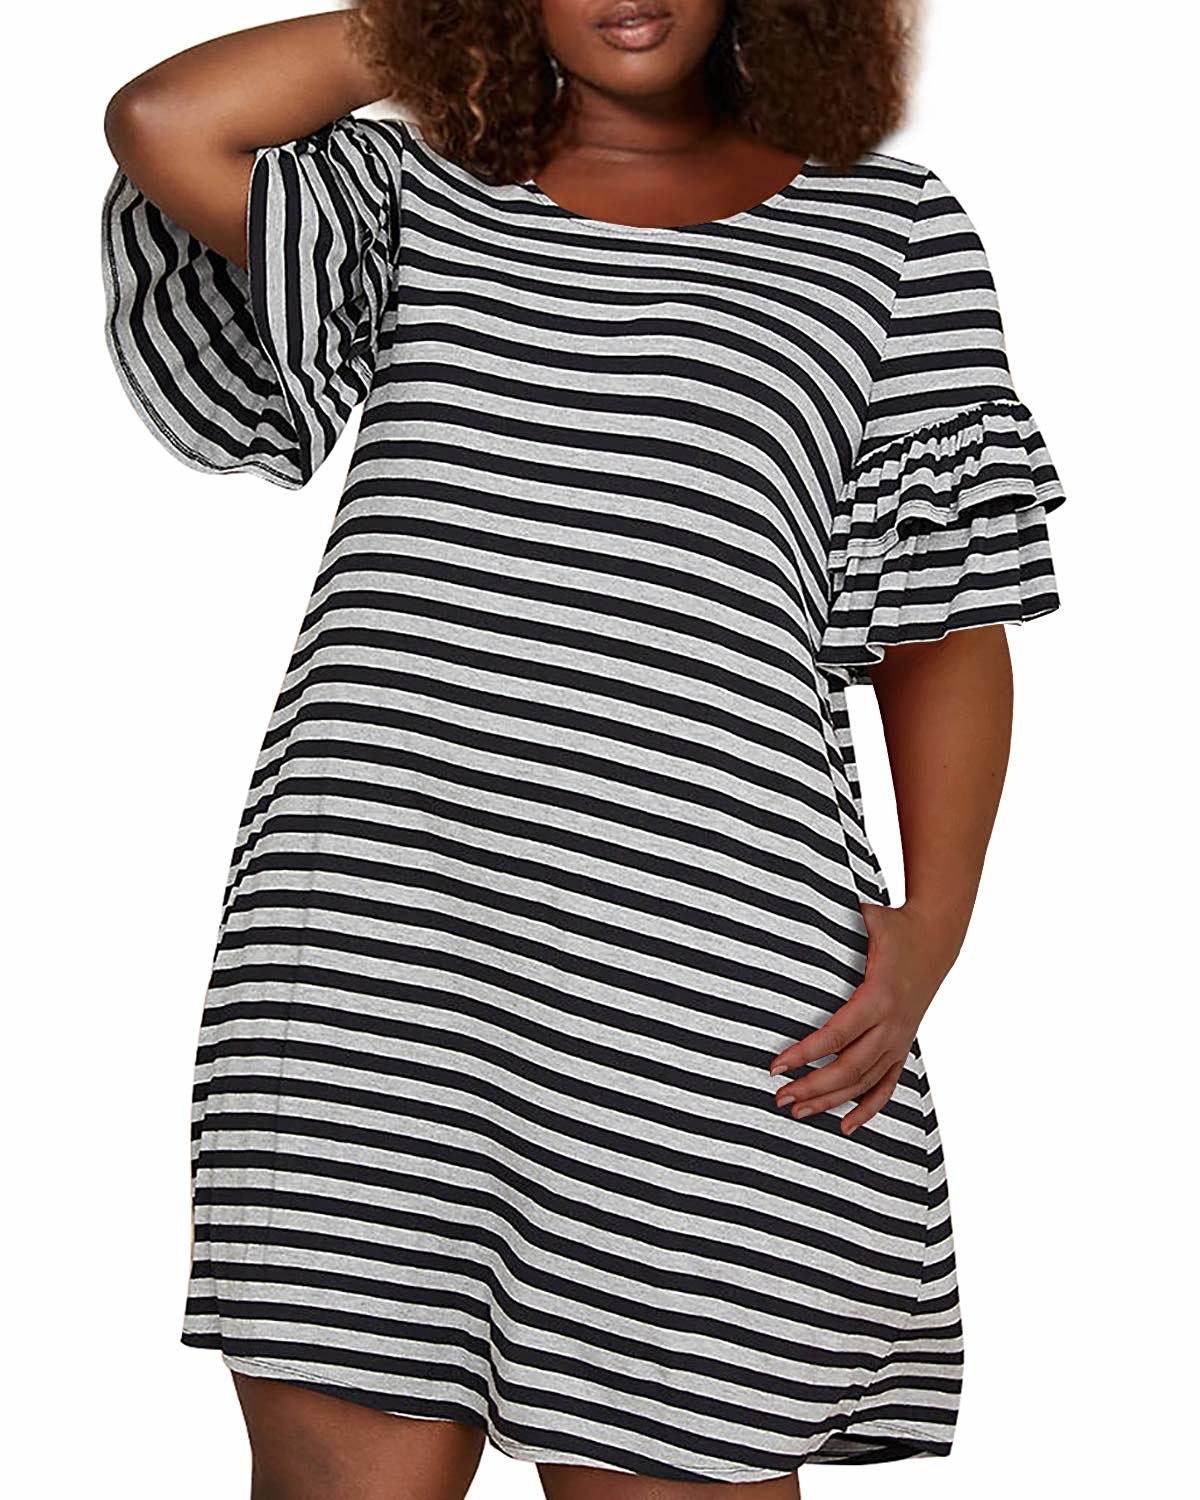 A plus-size model with one hand above their head and the other hand inside one of the pockets. The dress hits right at their thigh with ruffled sleeves that fall to just above the elbow. 